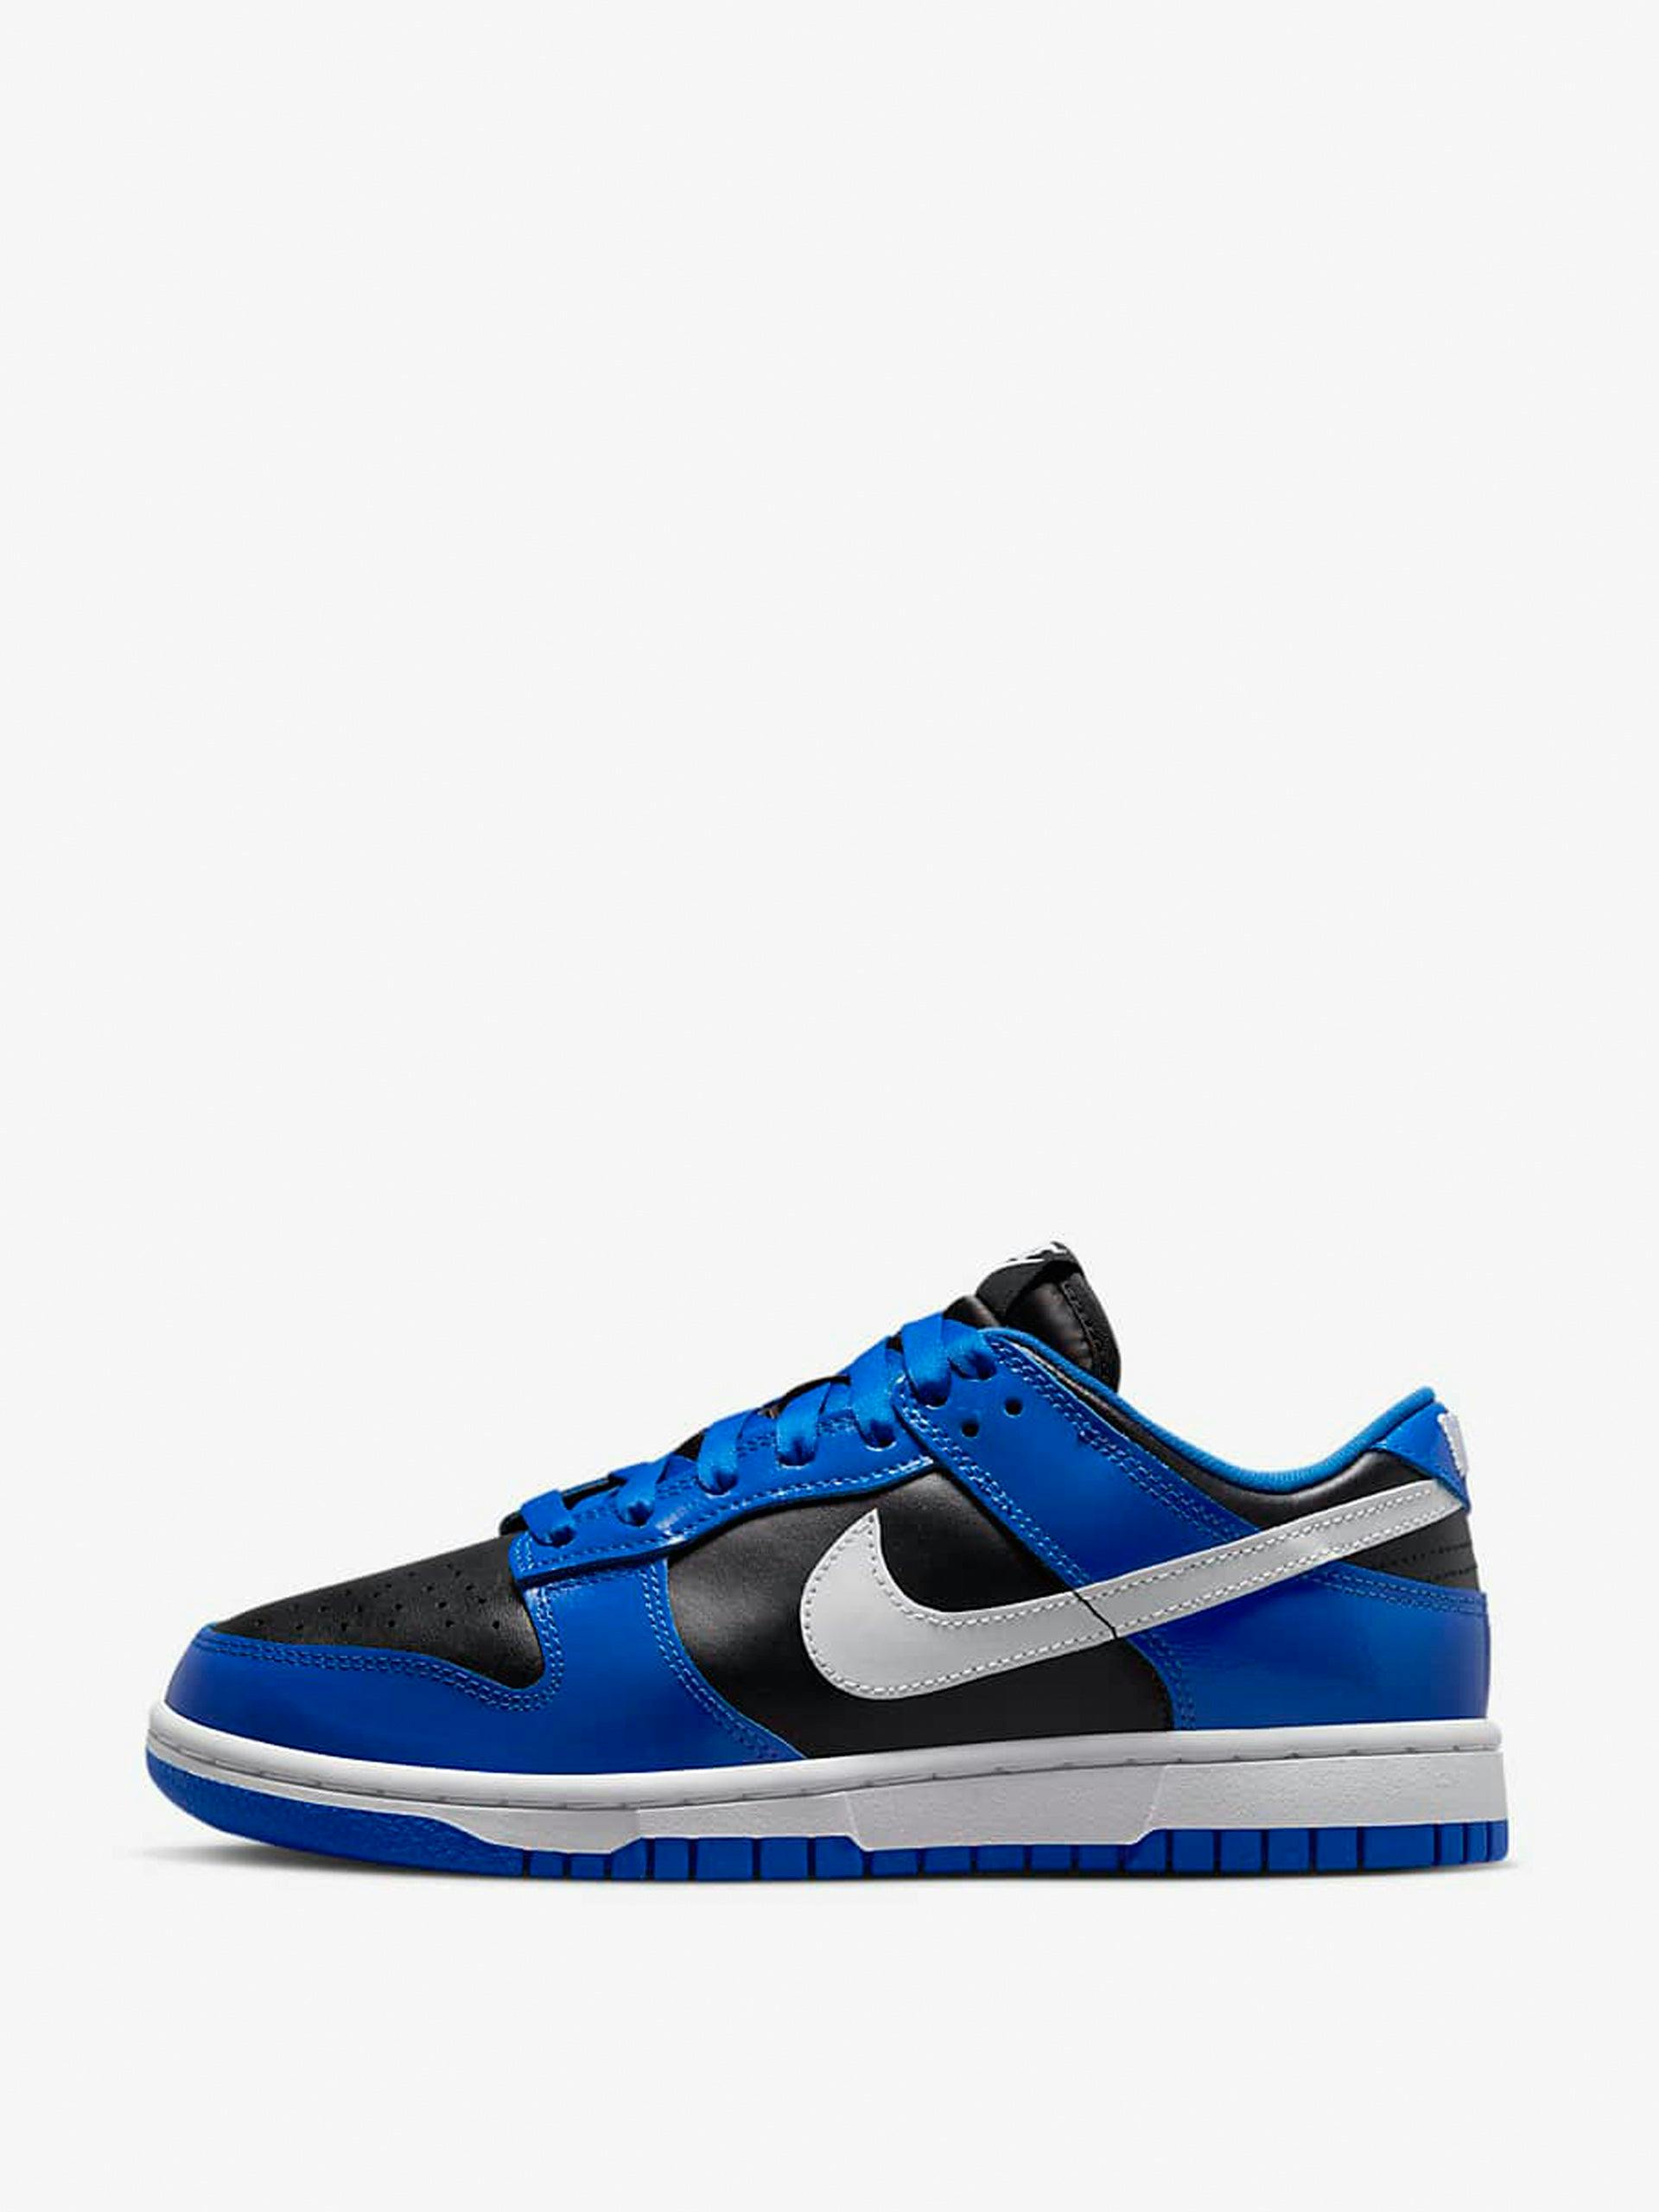 Dunk low ESS trainers